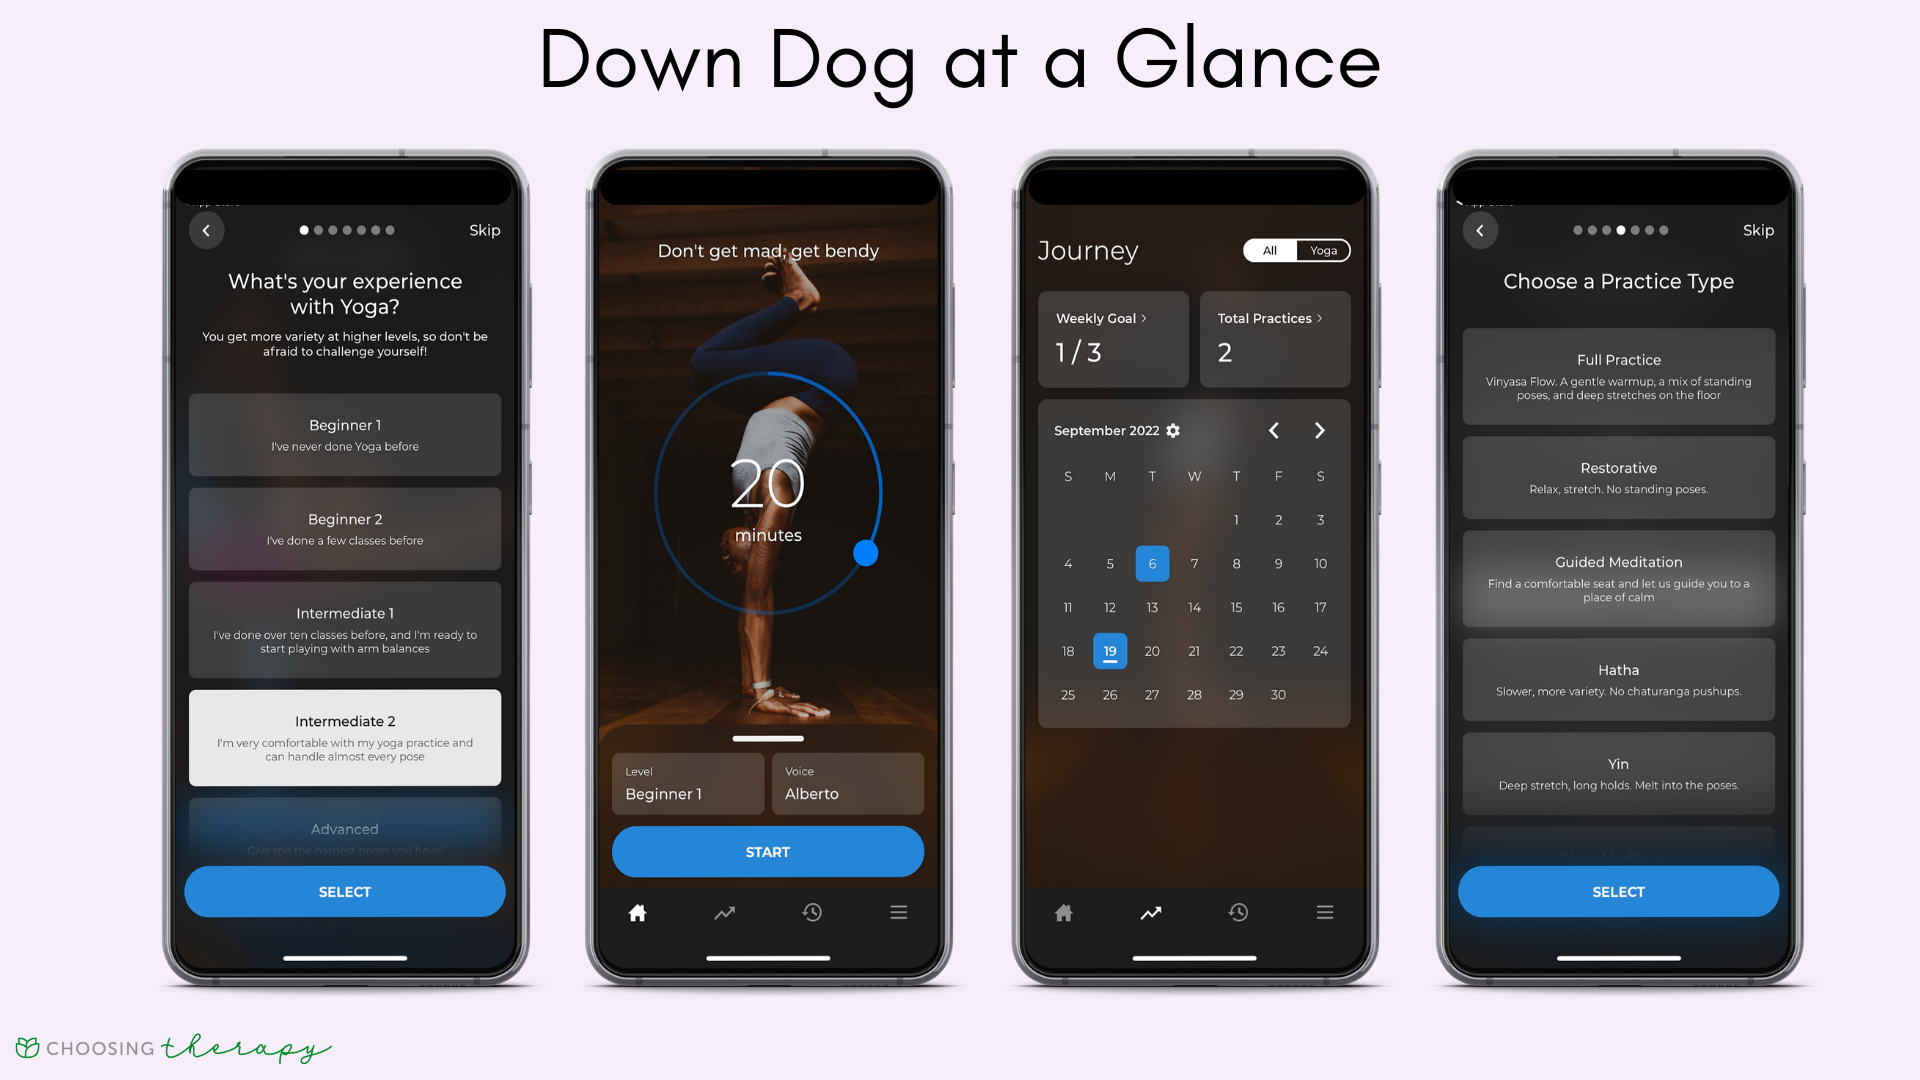 Four images of the key features of Down Dog yoga app